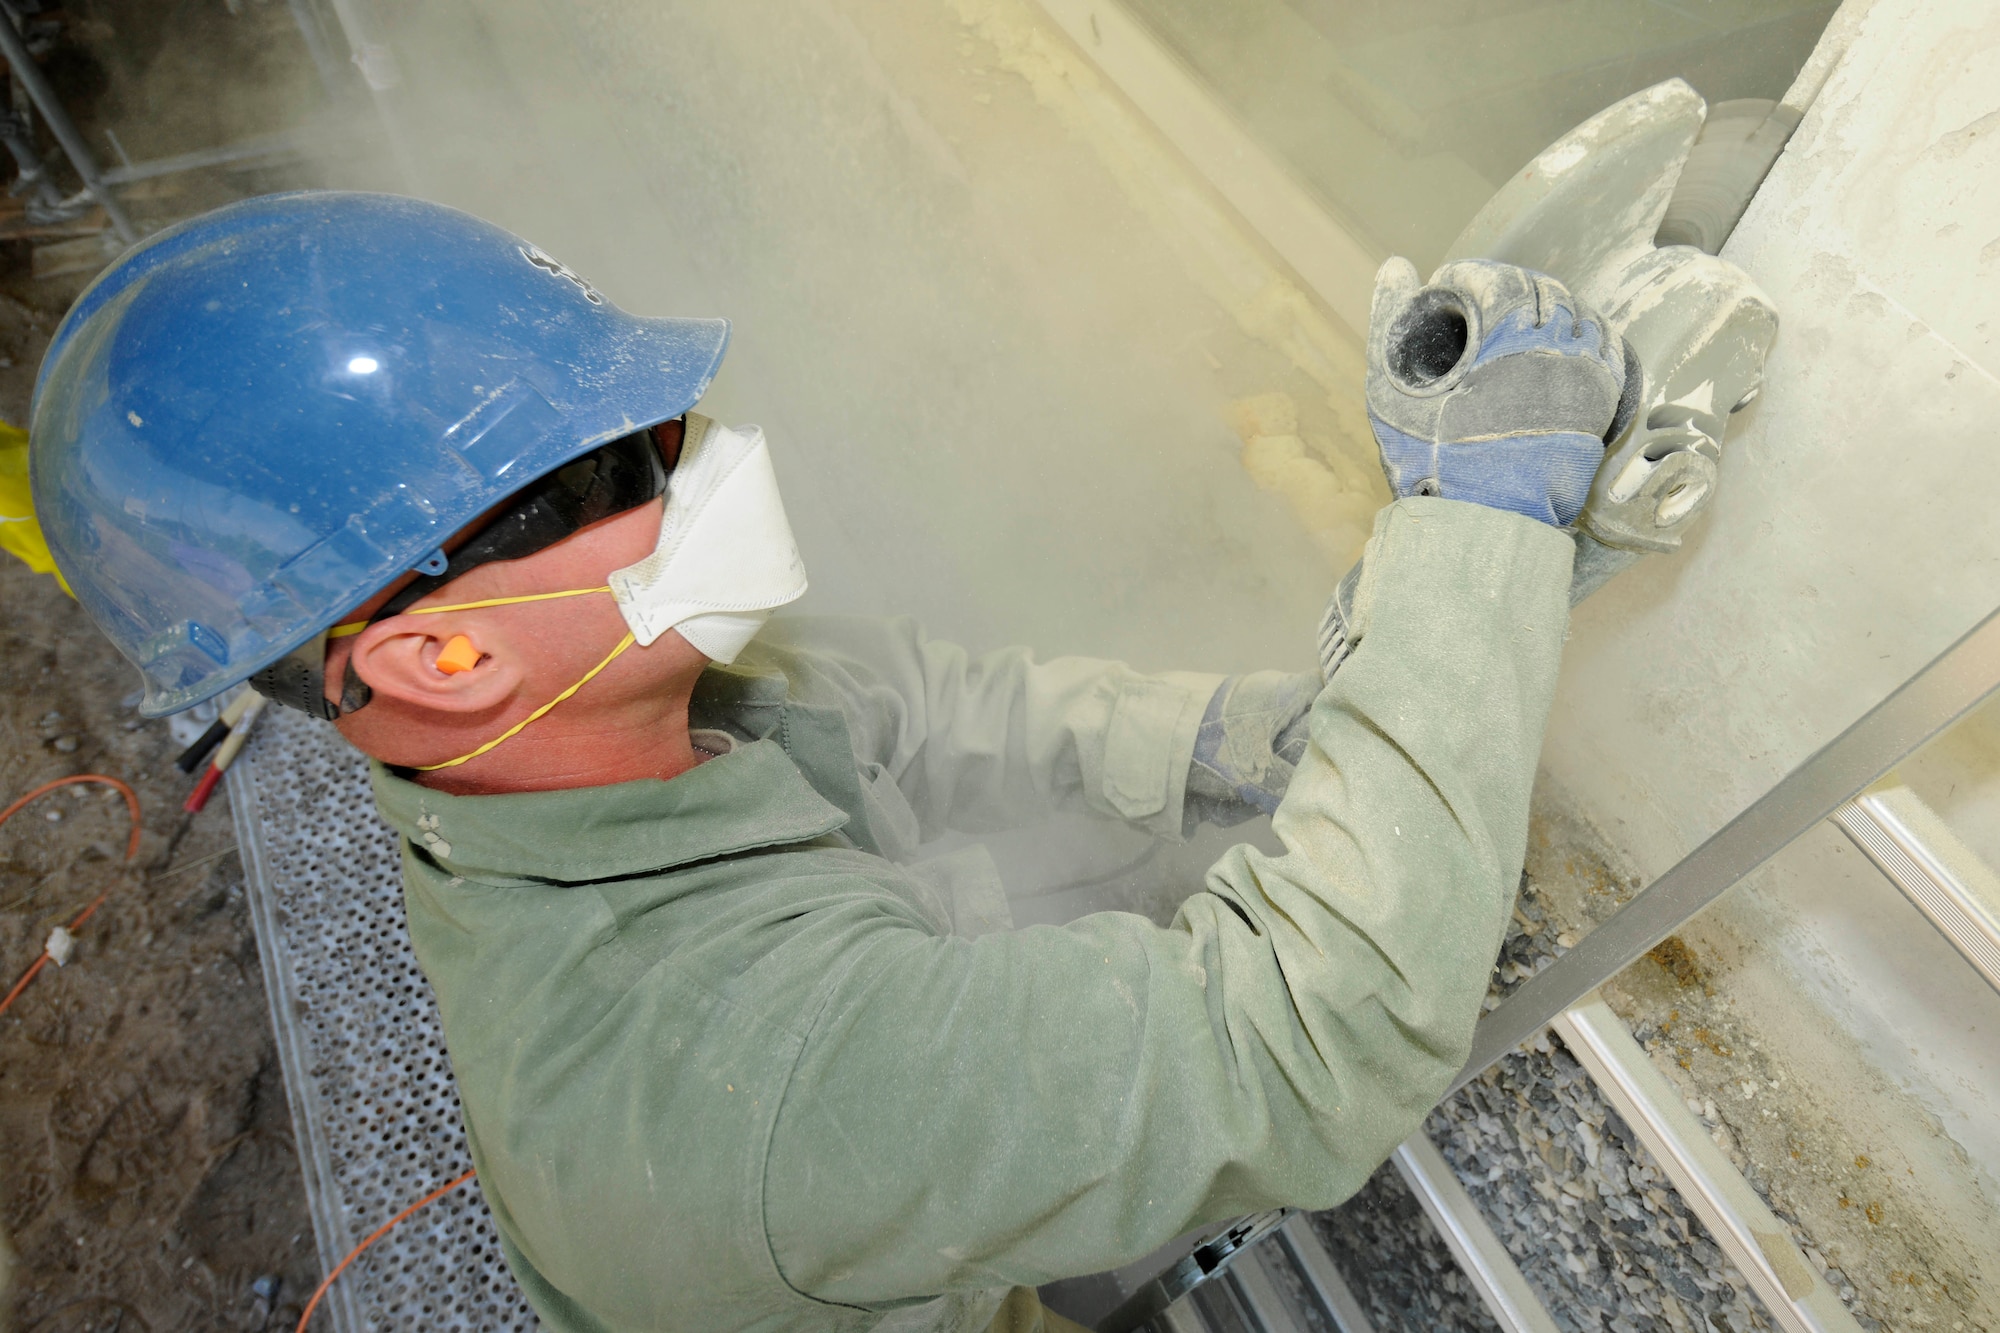 Tech. Sgt. Derek Leppek, 127th Civil Engineering Squadron structures supervisor, cuts into the concrete around a window of a kindergarten school in Silmala, Latvia on June 19, 2016. The school is undergoing construction as part of the U.S. European Command’s Humanitarian Civic-Assistance project. United States and Latvian military engineers are working together to complete the project. (U.S. Air National Guard photo by Senior Airman Ryan Zeski)